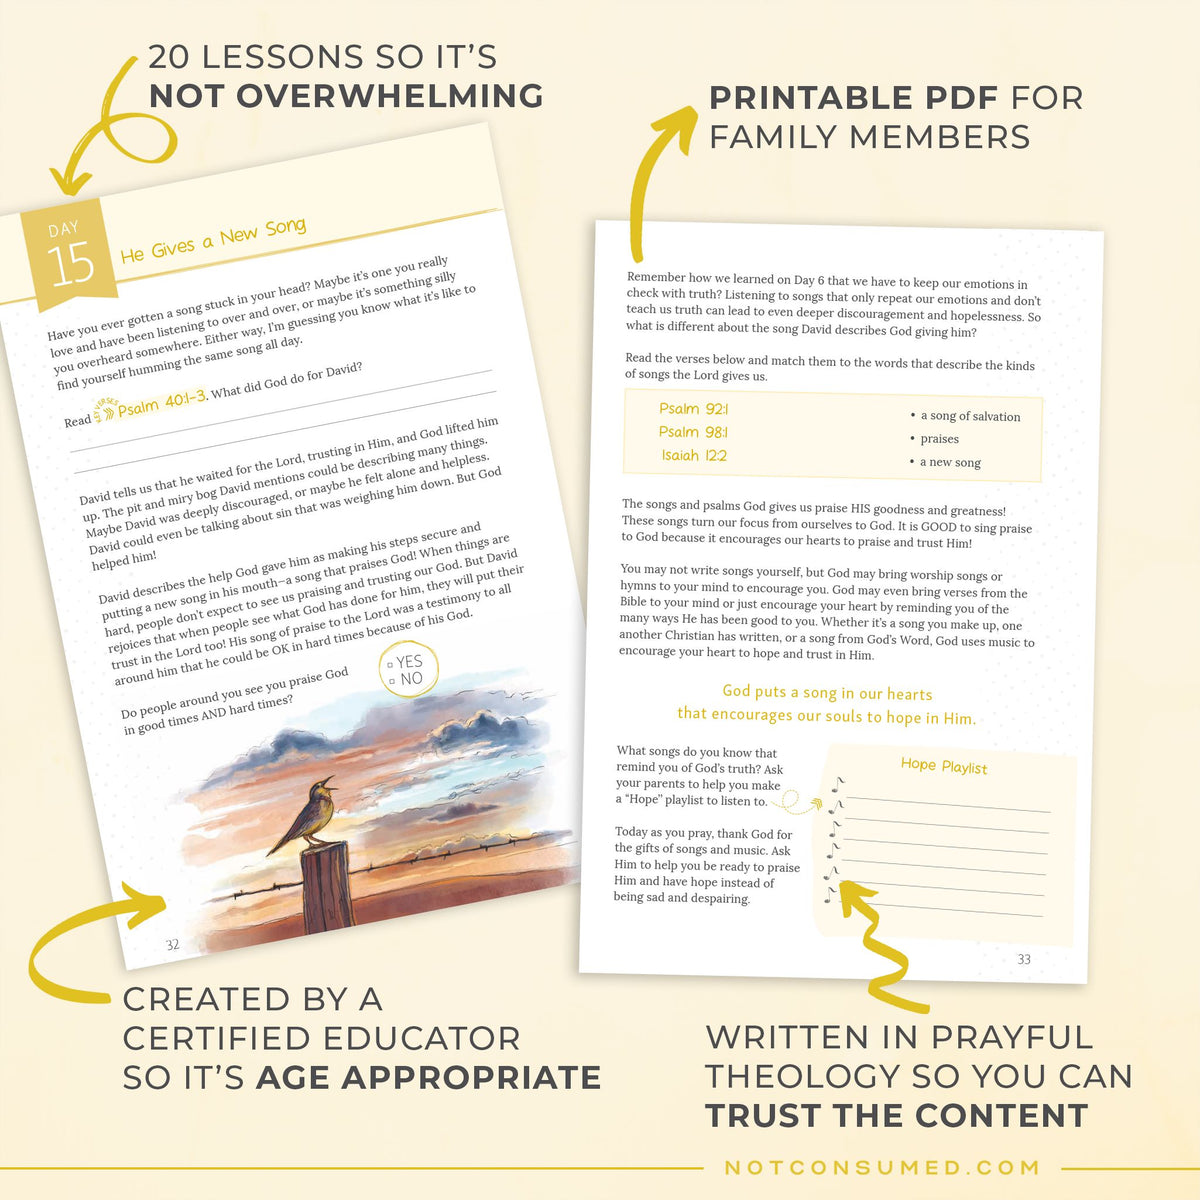 Abounding in Hope digital printable Bible Study features